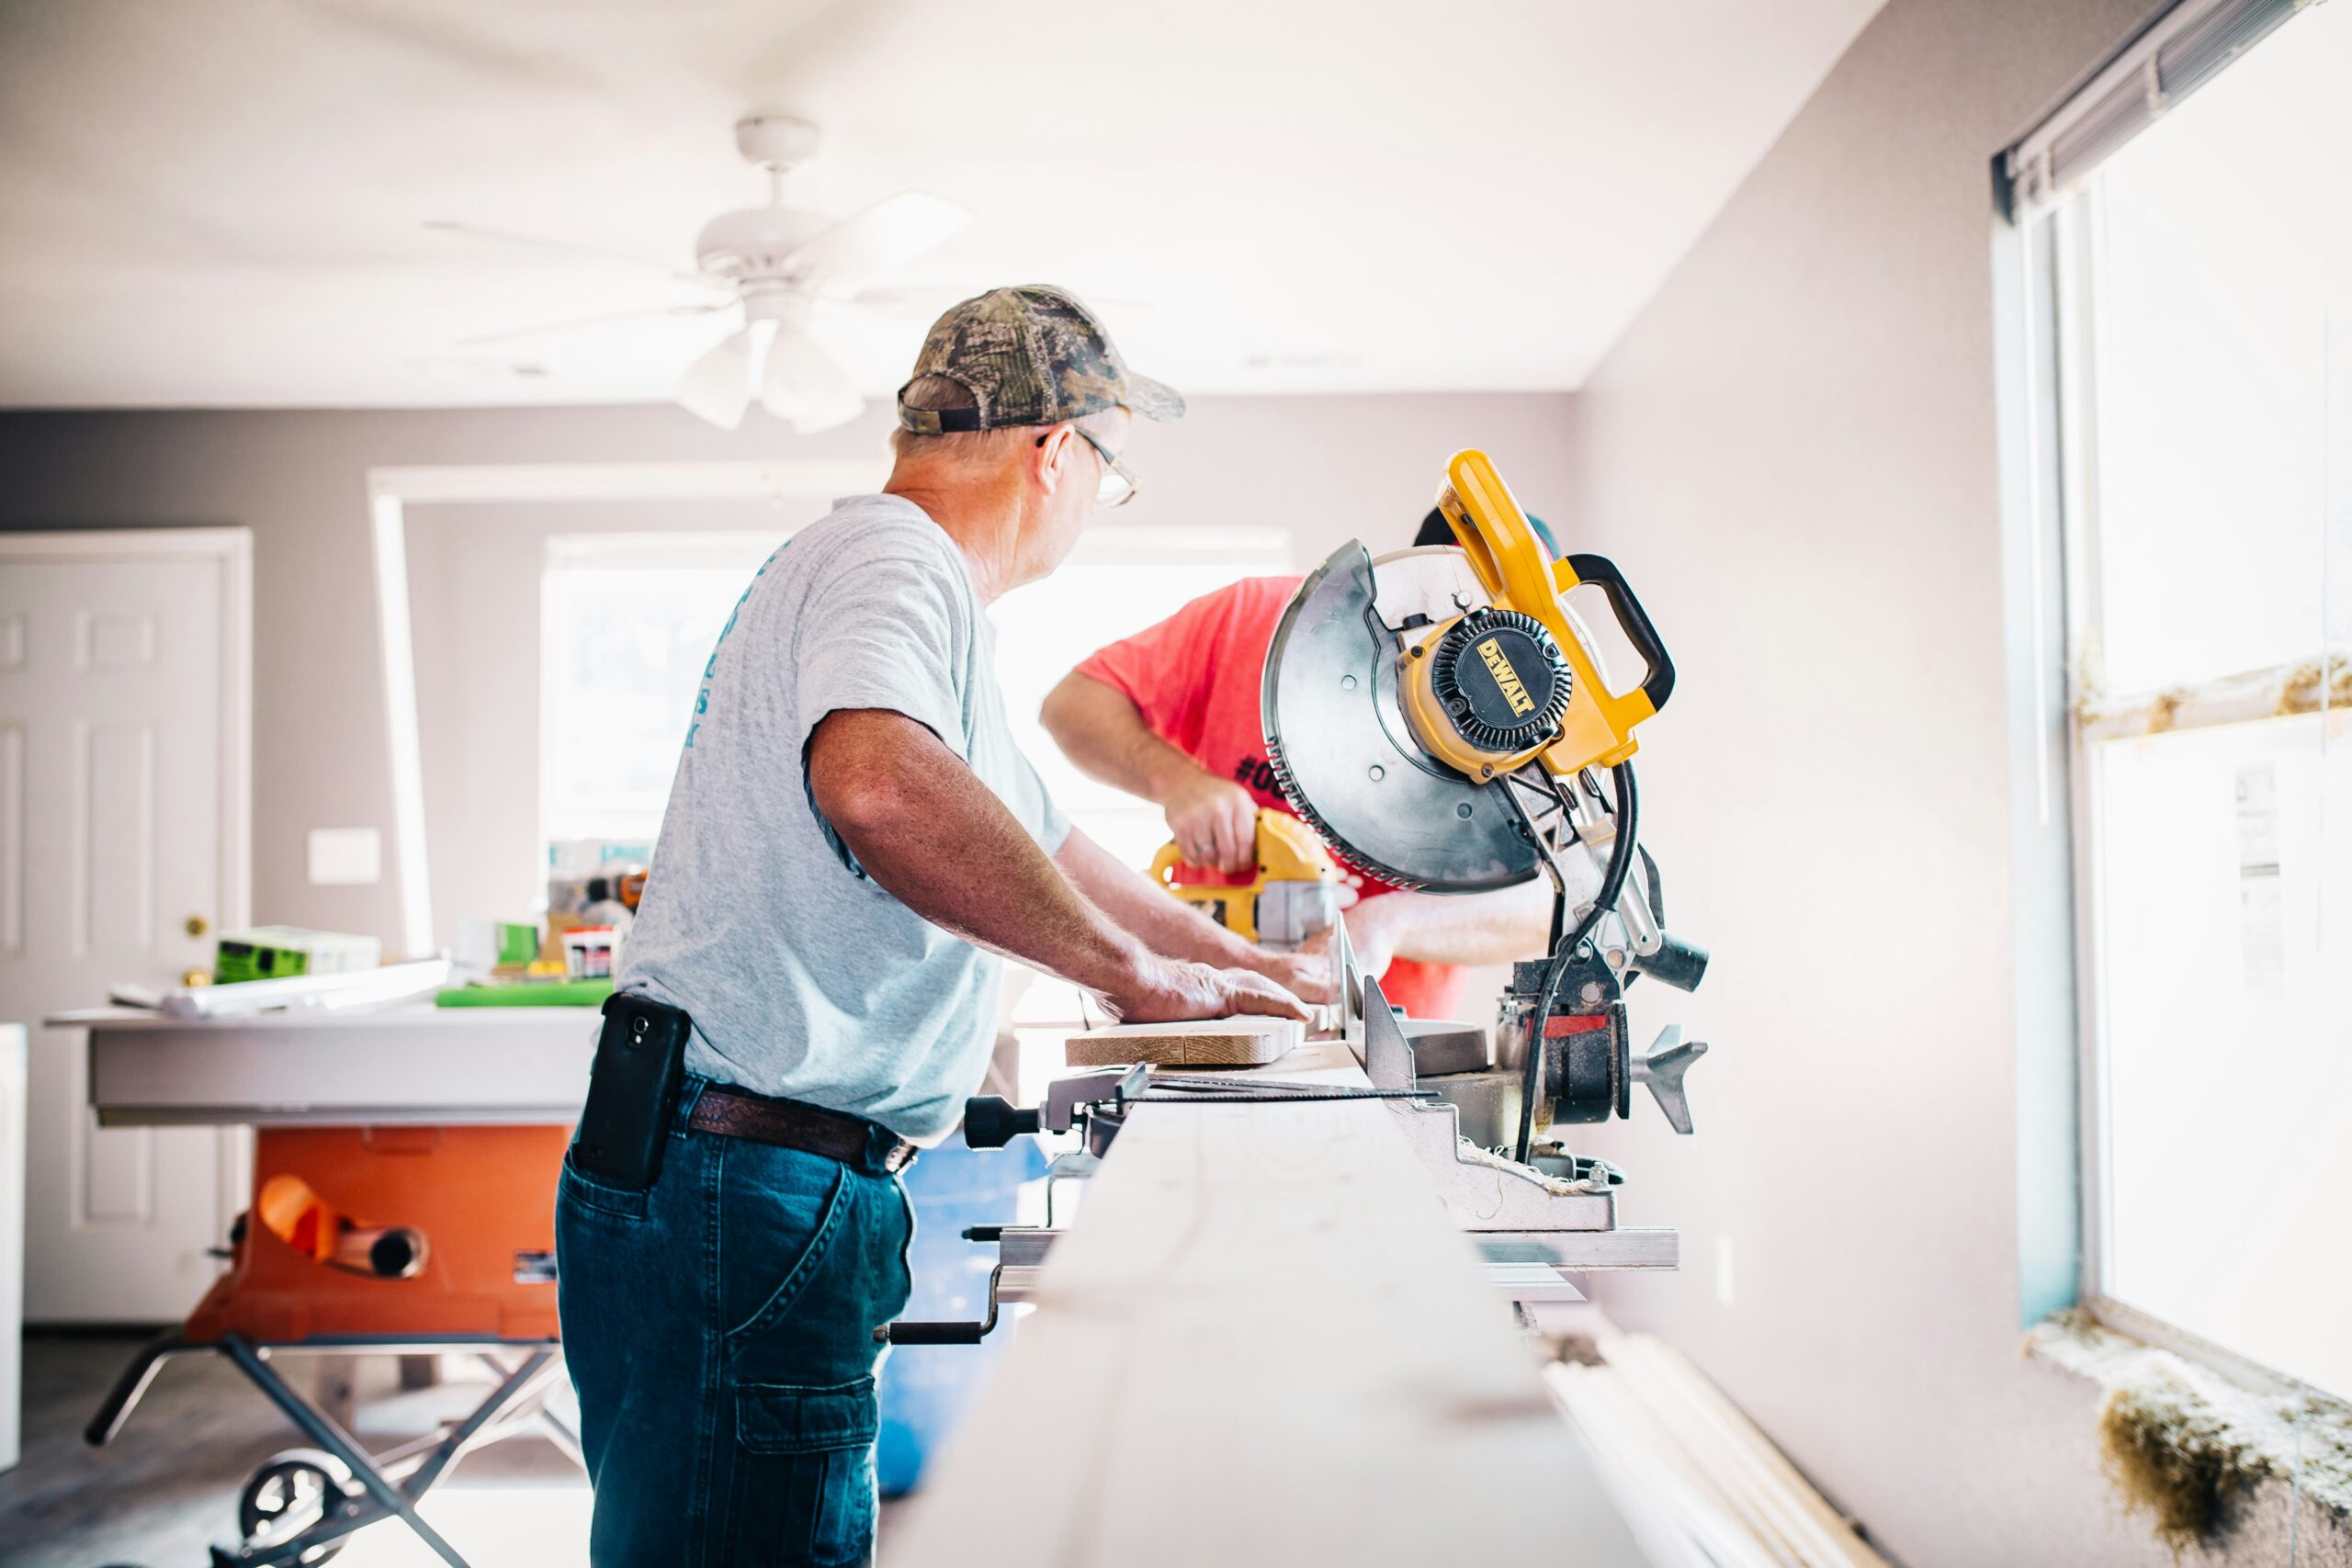 Tips for Budget-Friendly Home Remodeling